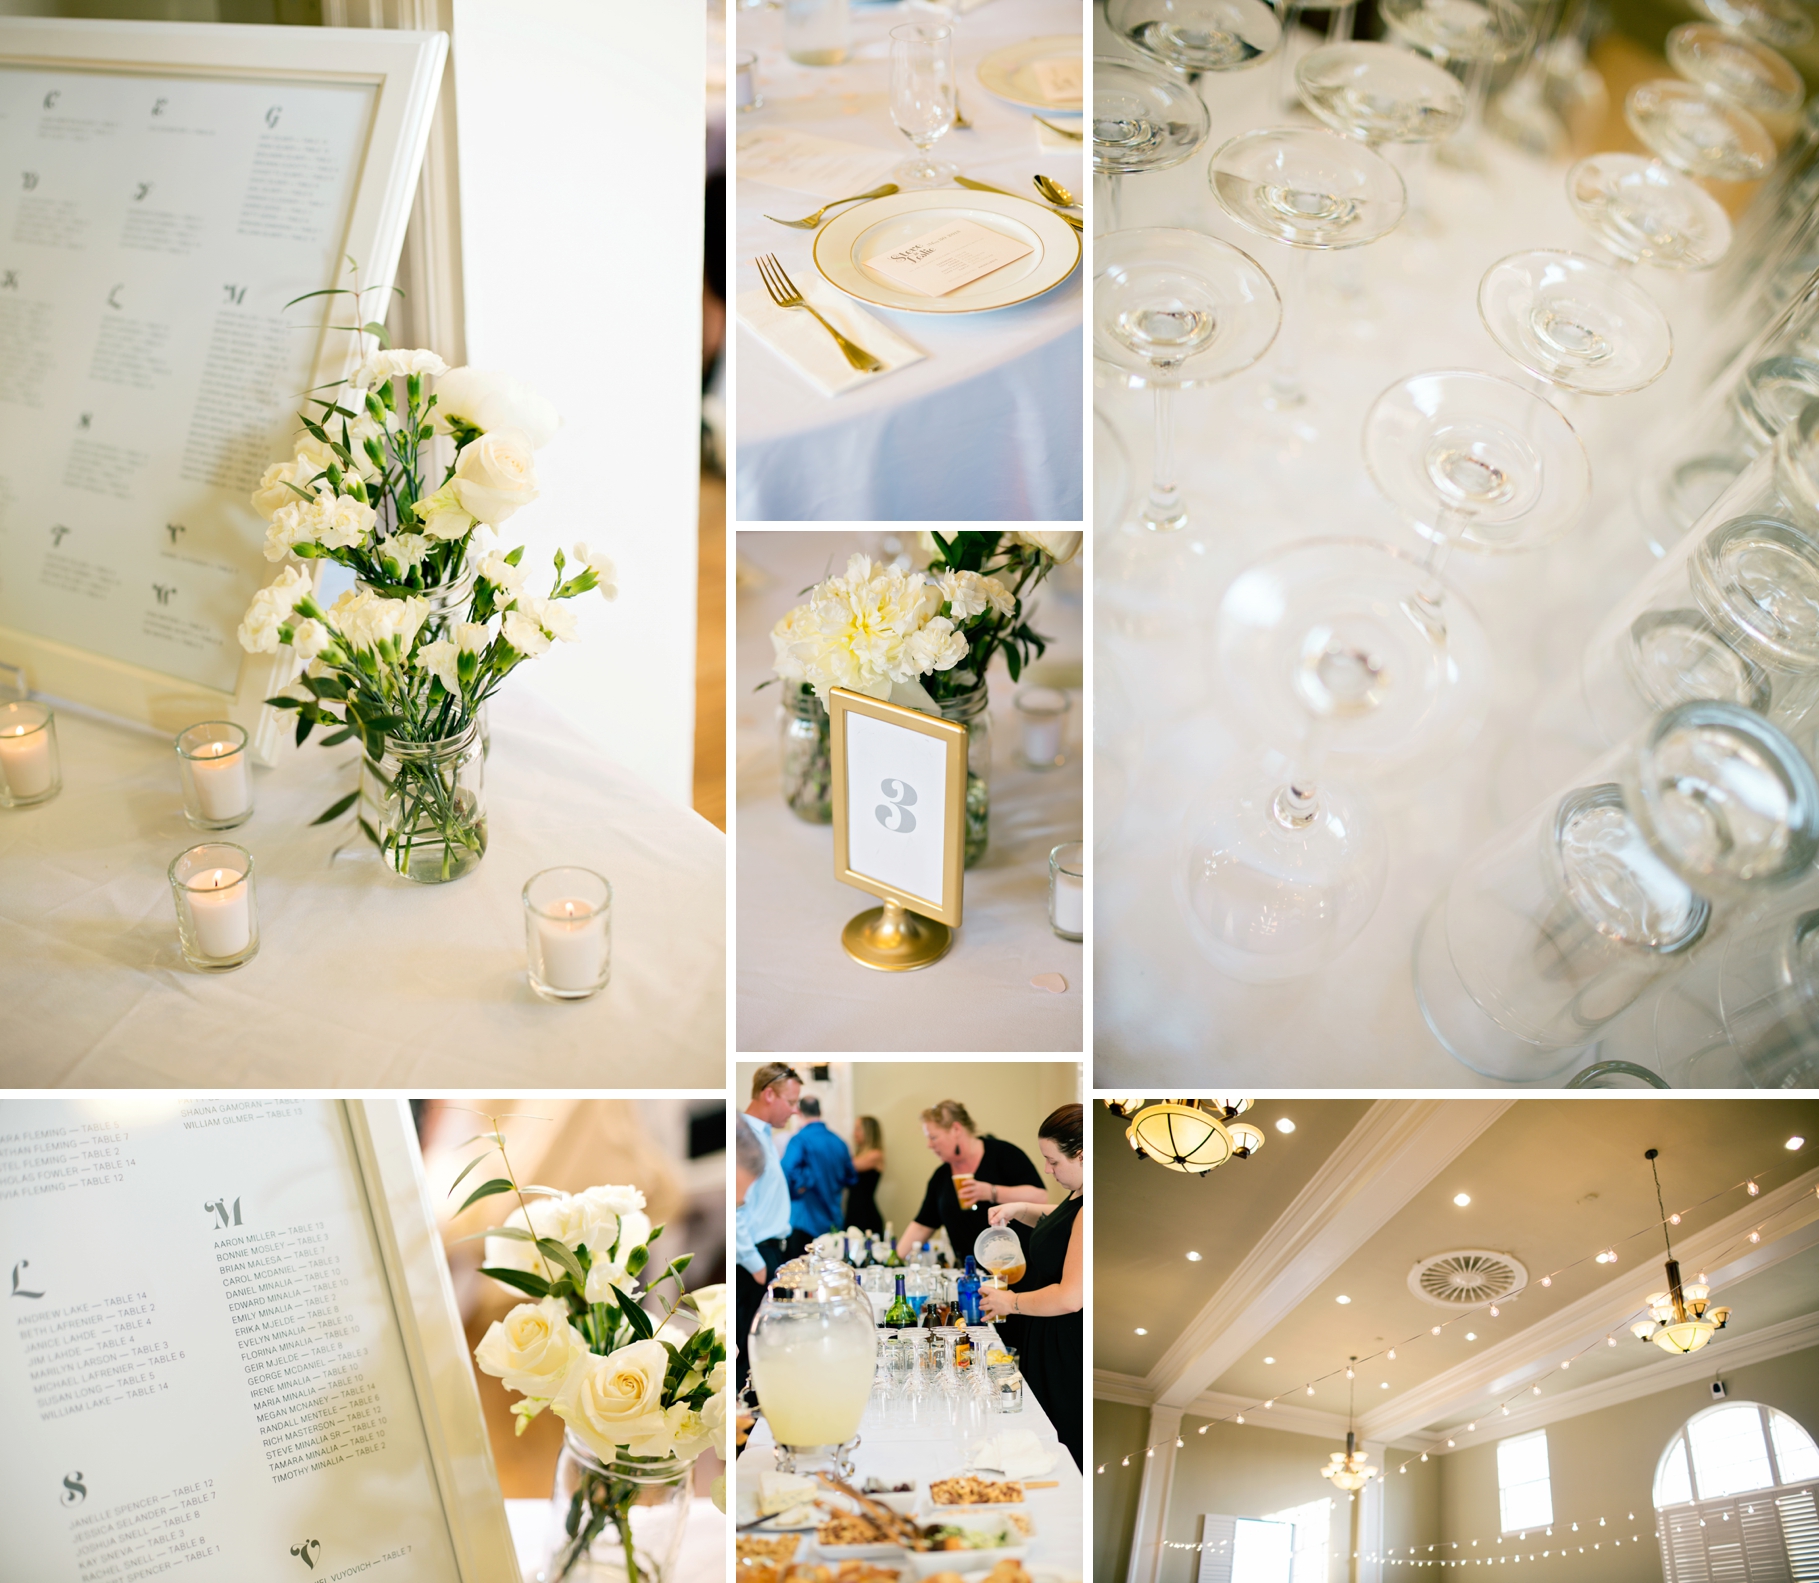 48-Great-Hall-Green-Lake-Wedding-Reception-Details-Classic-Style-White-Flowers-Vintage-Chandeliers-Seattle-Wedding-Photographer-Photography-by-Betty-Elaine